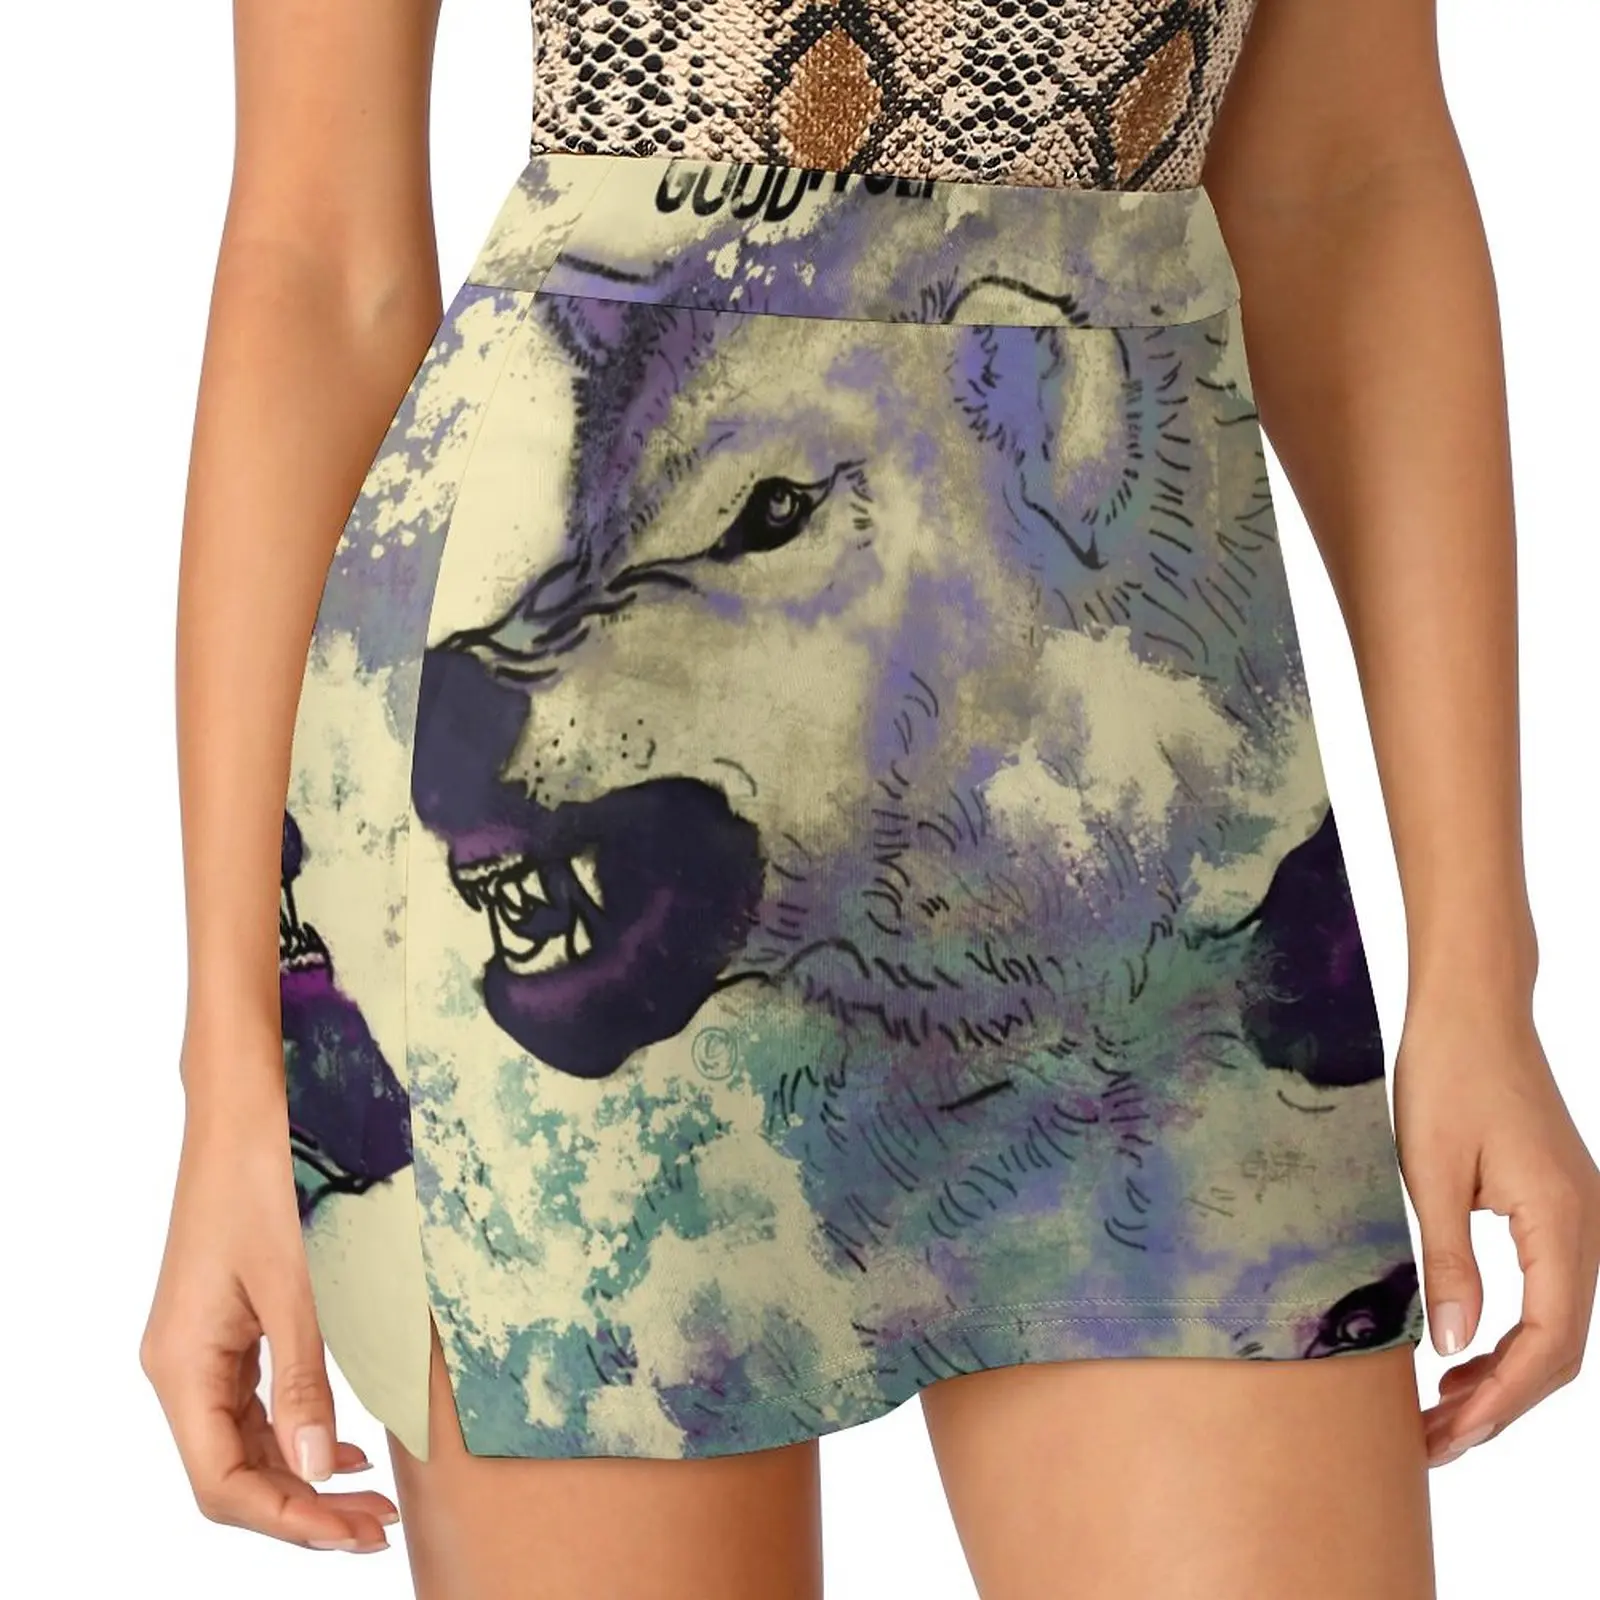 Good Wolf (for GraphX Garment) Light Proof Trouser Skirt Female skirt women clothes the fox and the wolf лисичка и волк